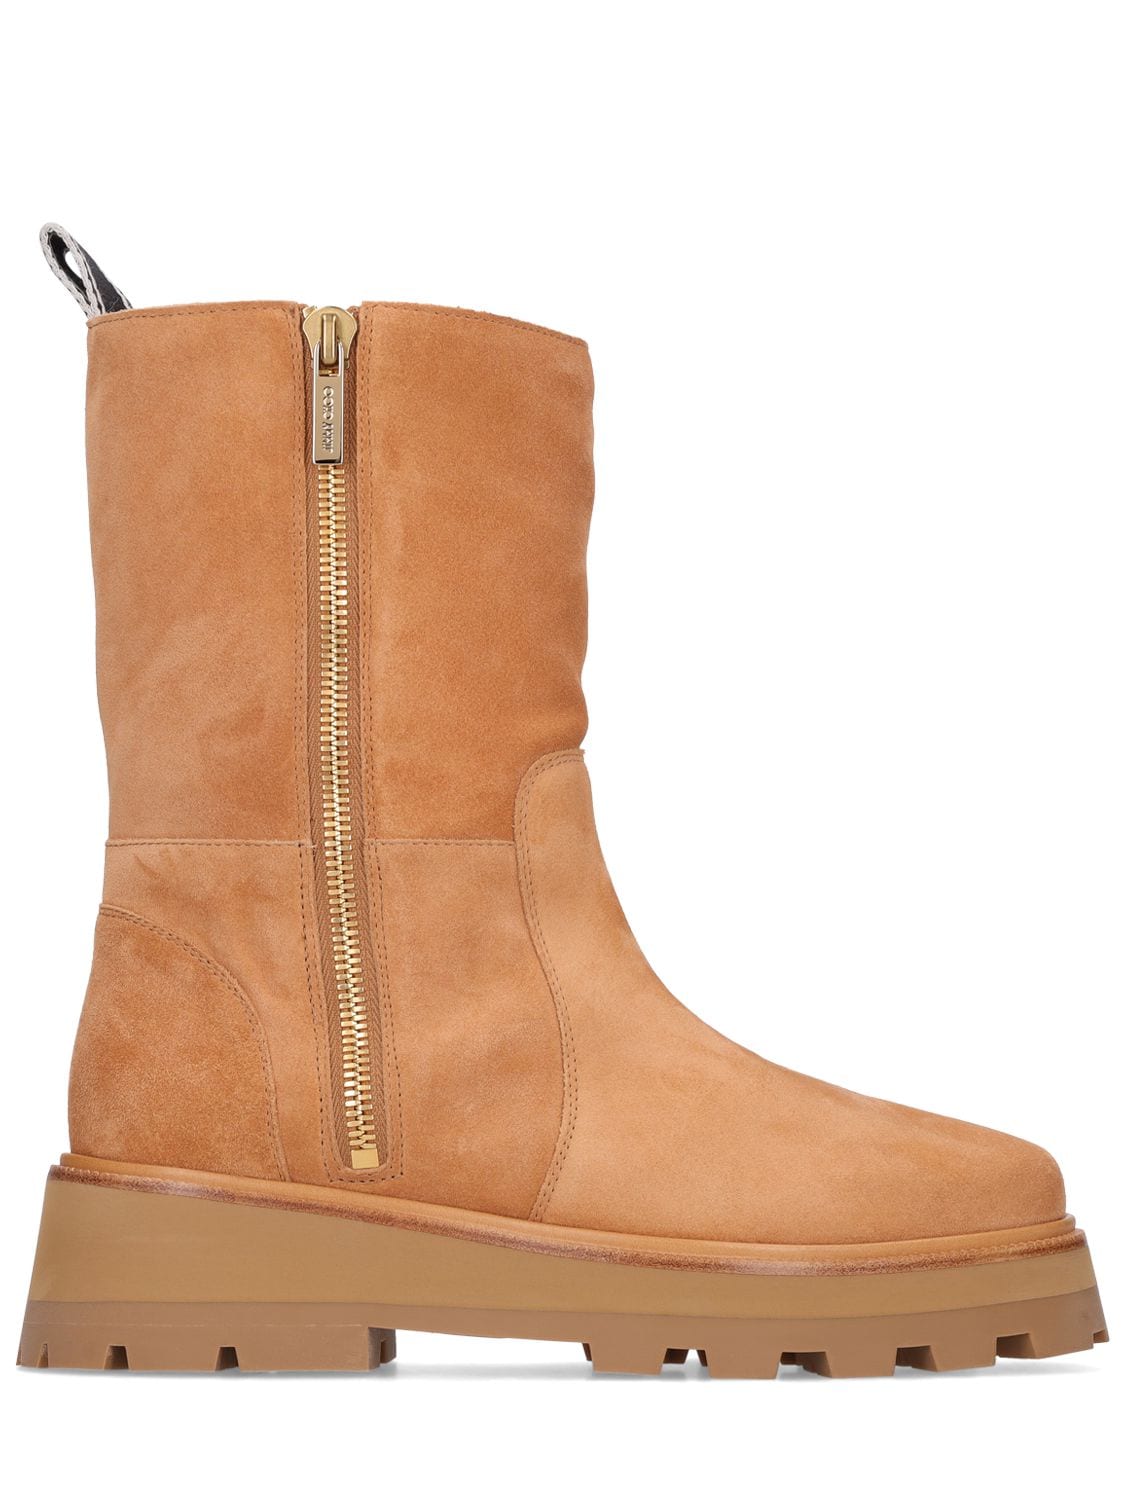 JIMMY CHOO 30mm Bayu Suede & Shearling Ankle Boots